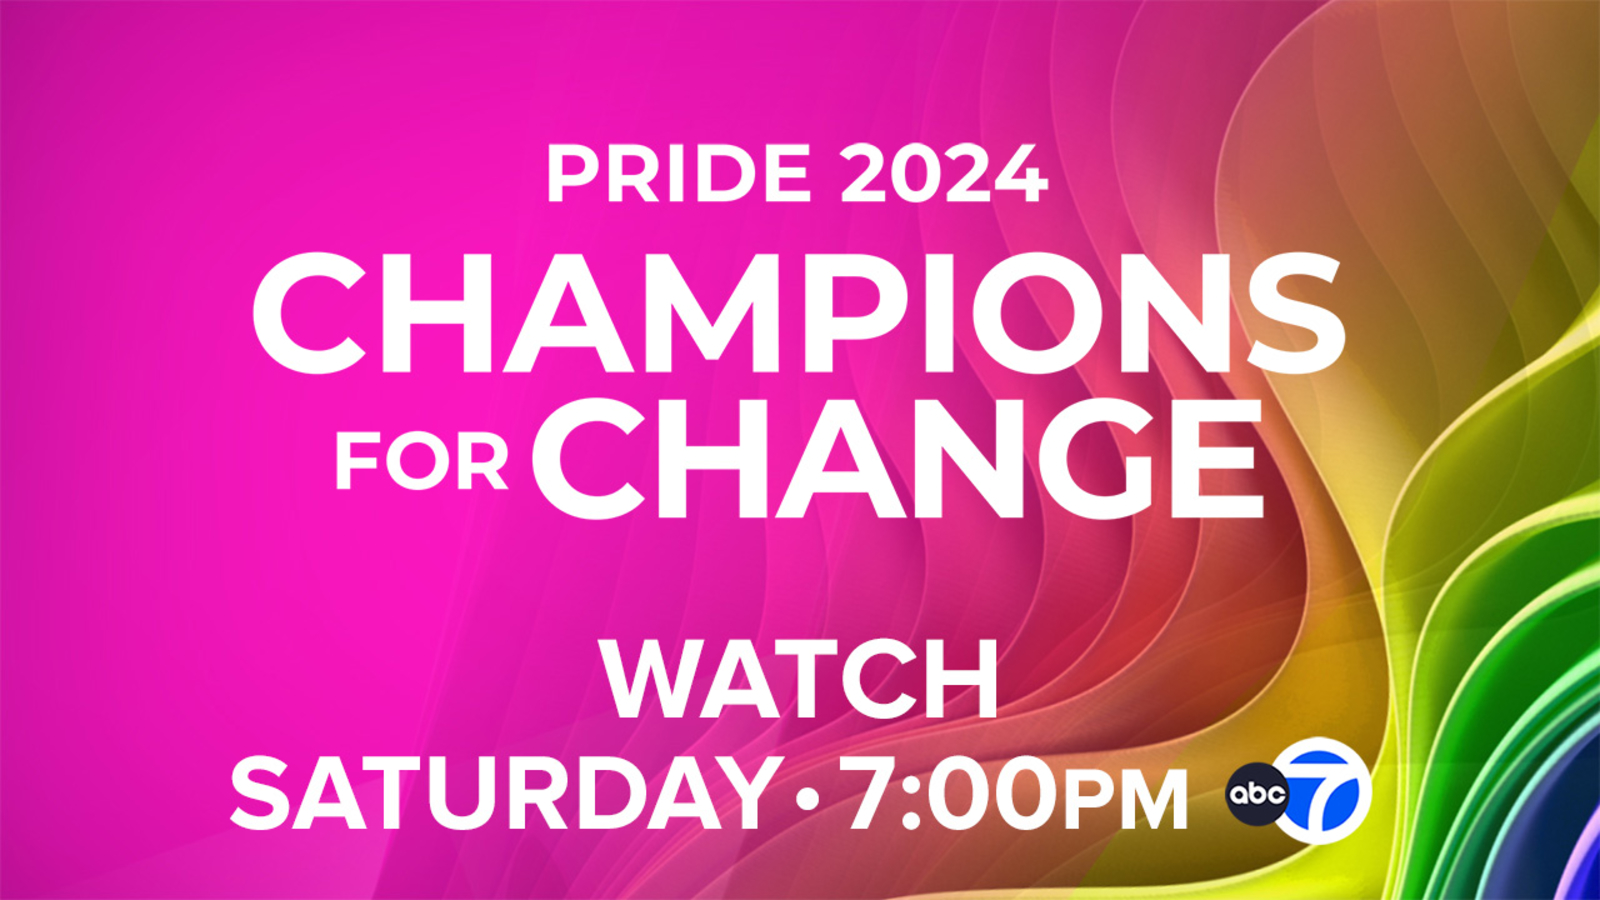 Pride NYC 2024: Champions for Change – Inspirational profiles about LGBTQ pioneers and advocates [Video]